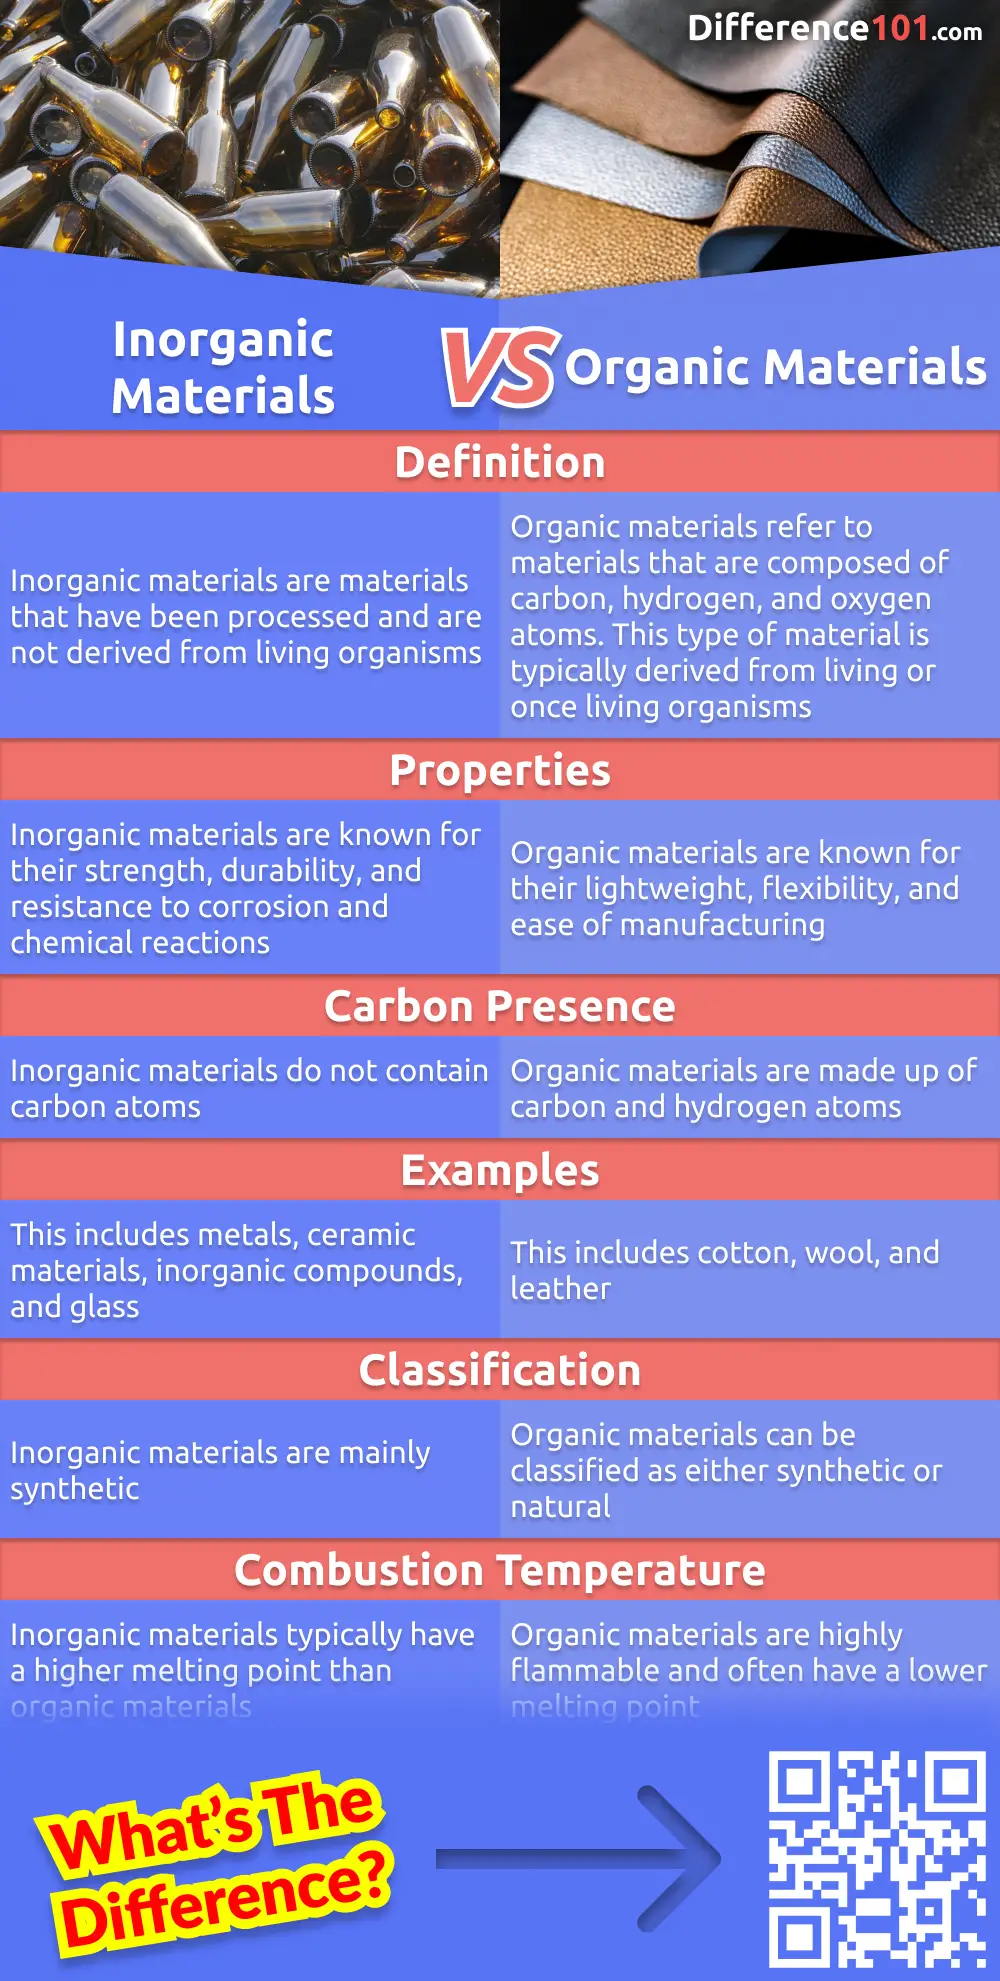 Are you trying to decide whether to use inorganic or organic materials? We'll explain the key differences between these two types of materials and also discuss the pros and cons of each. Read on to learn more.